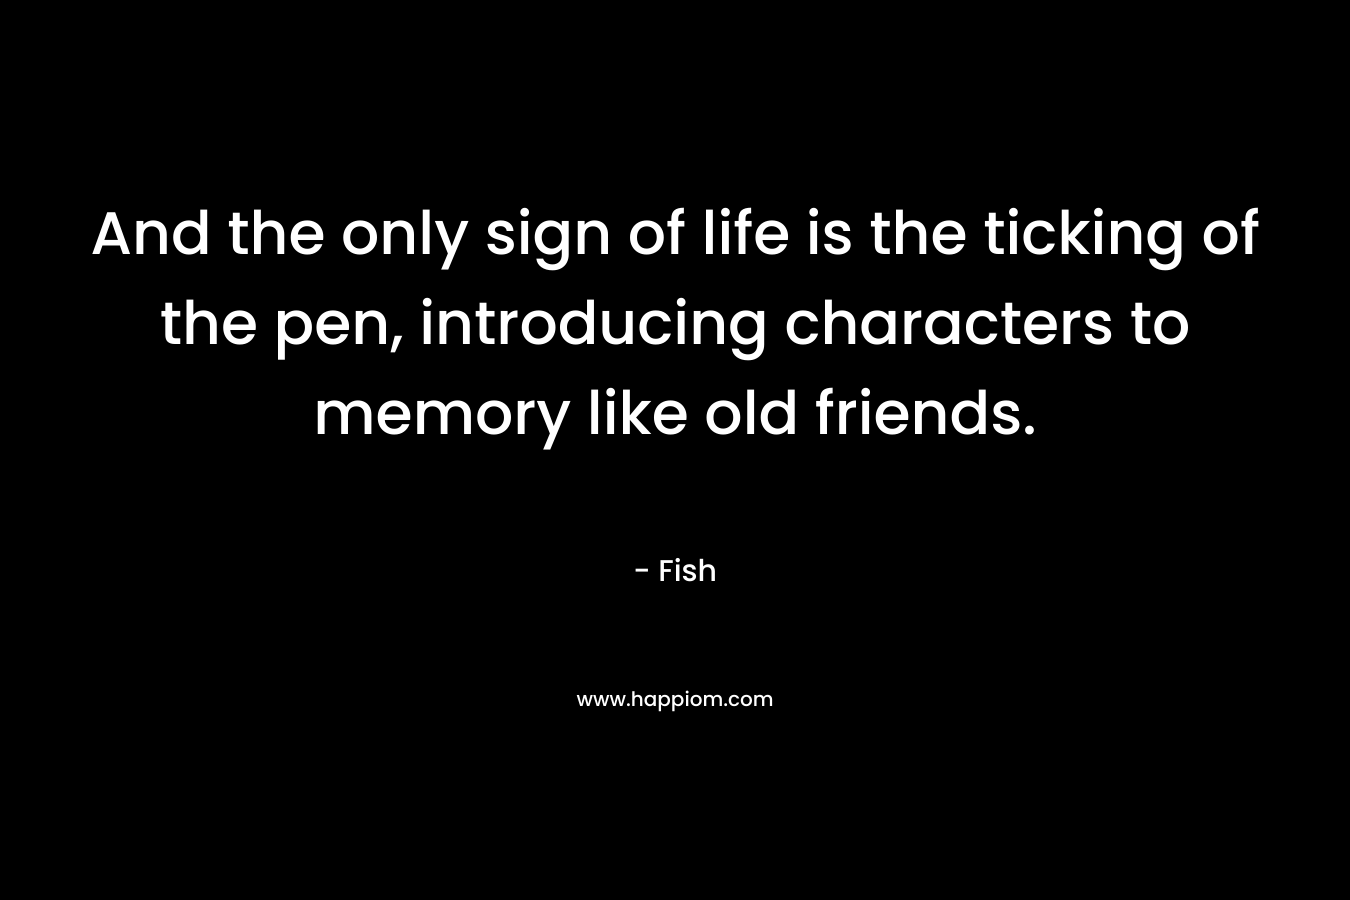 And the only sign of life is the ticking of the pen, introducing characters to memory like old friends. – Fish